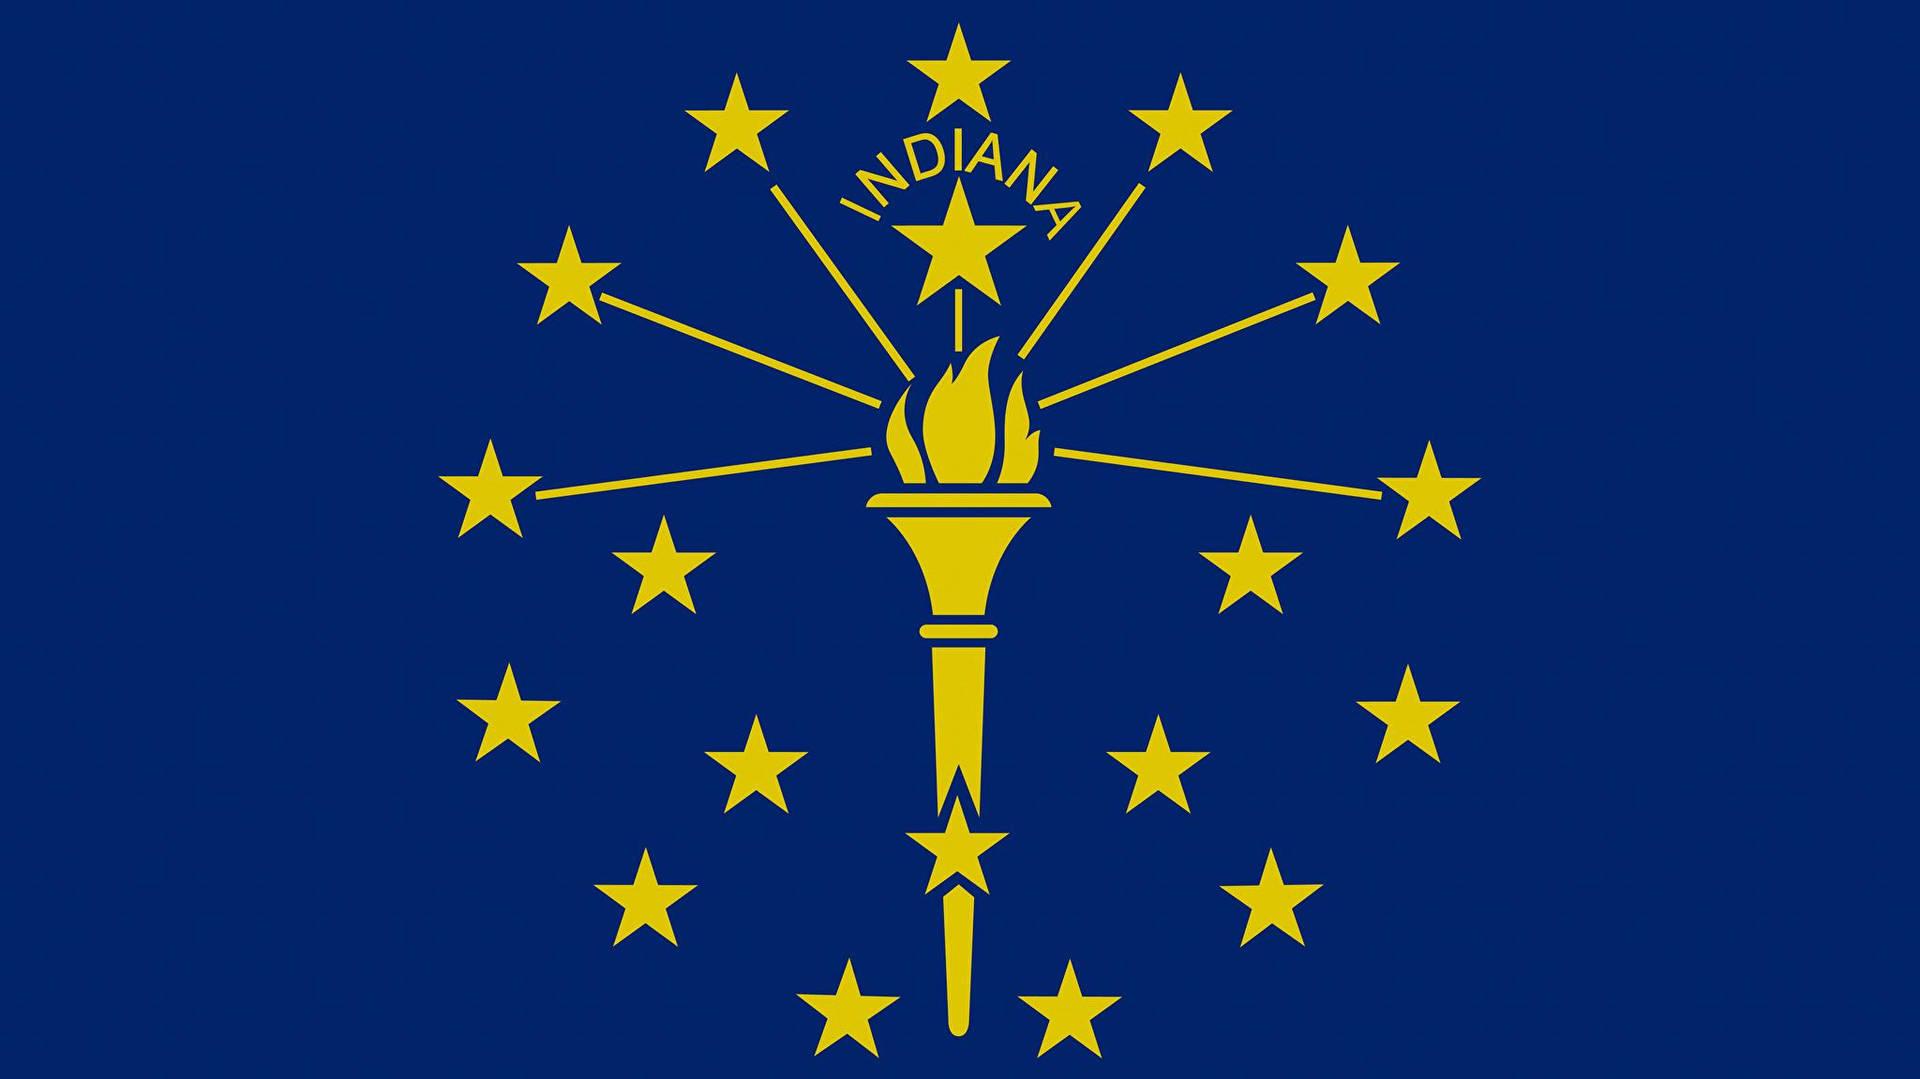 Indiana Flag Zoomed In Wallpaper